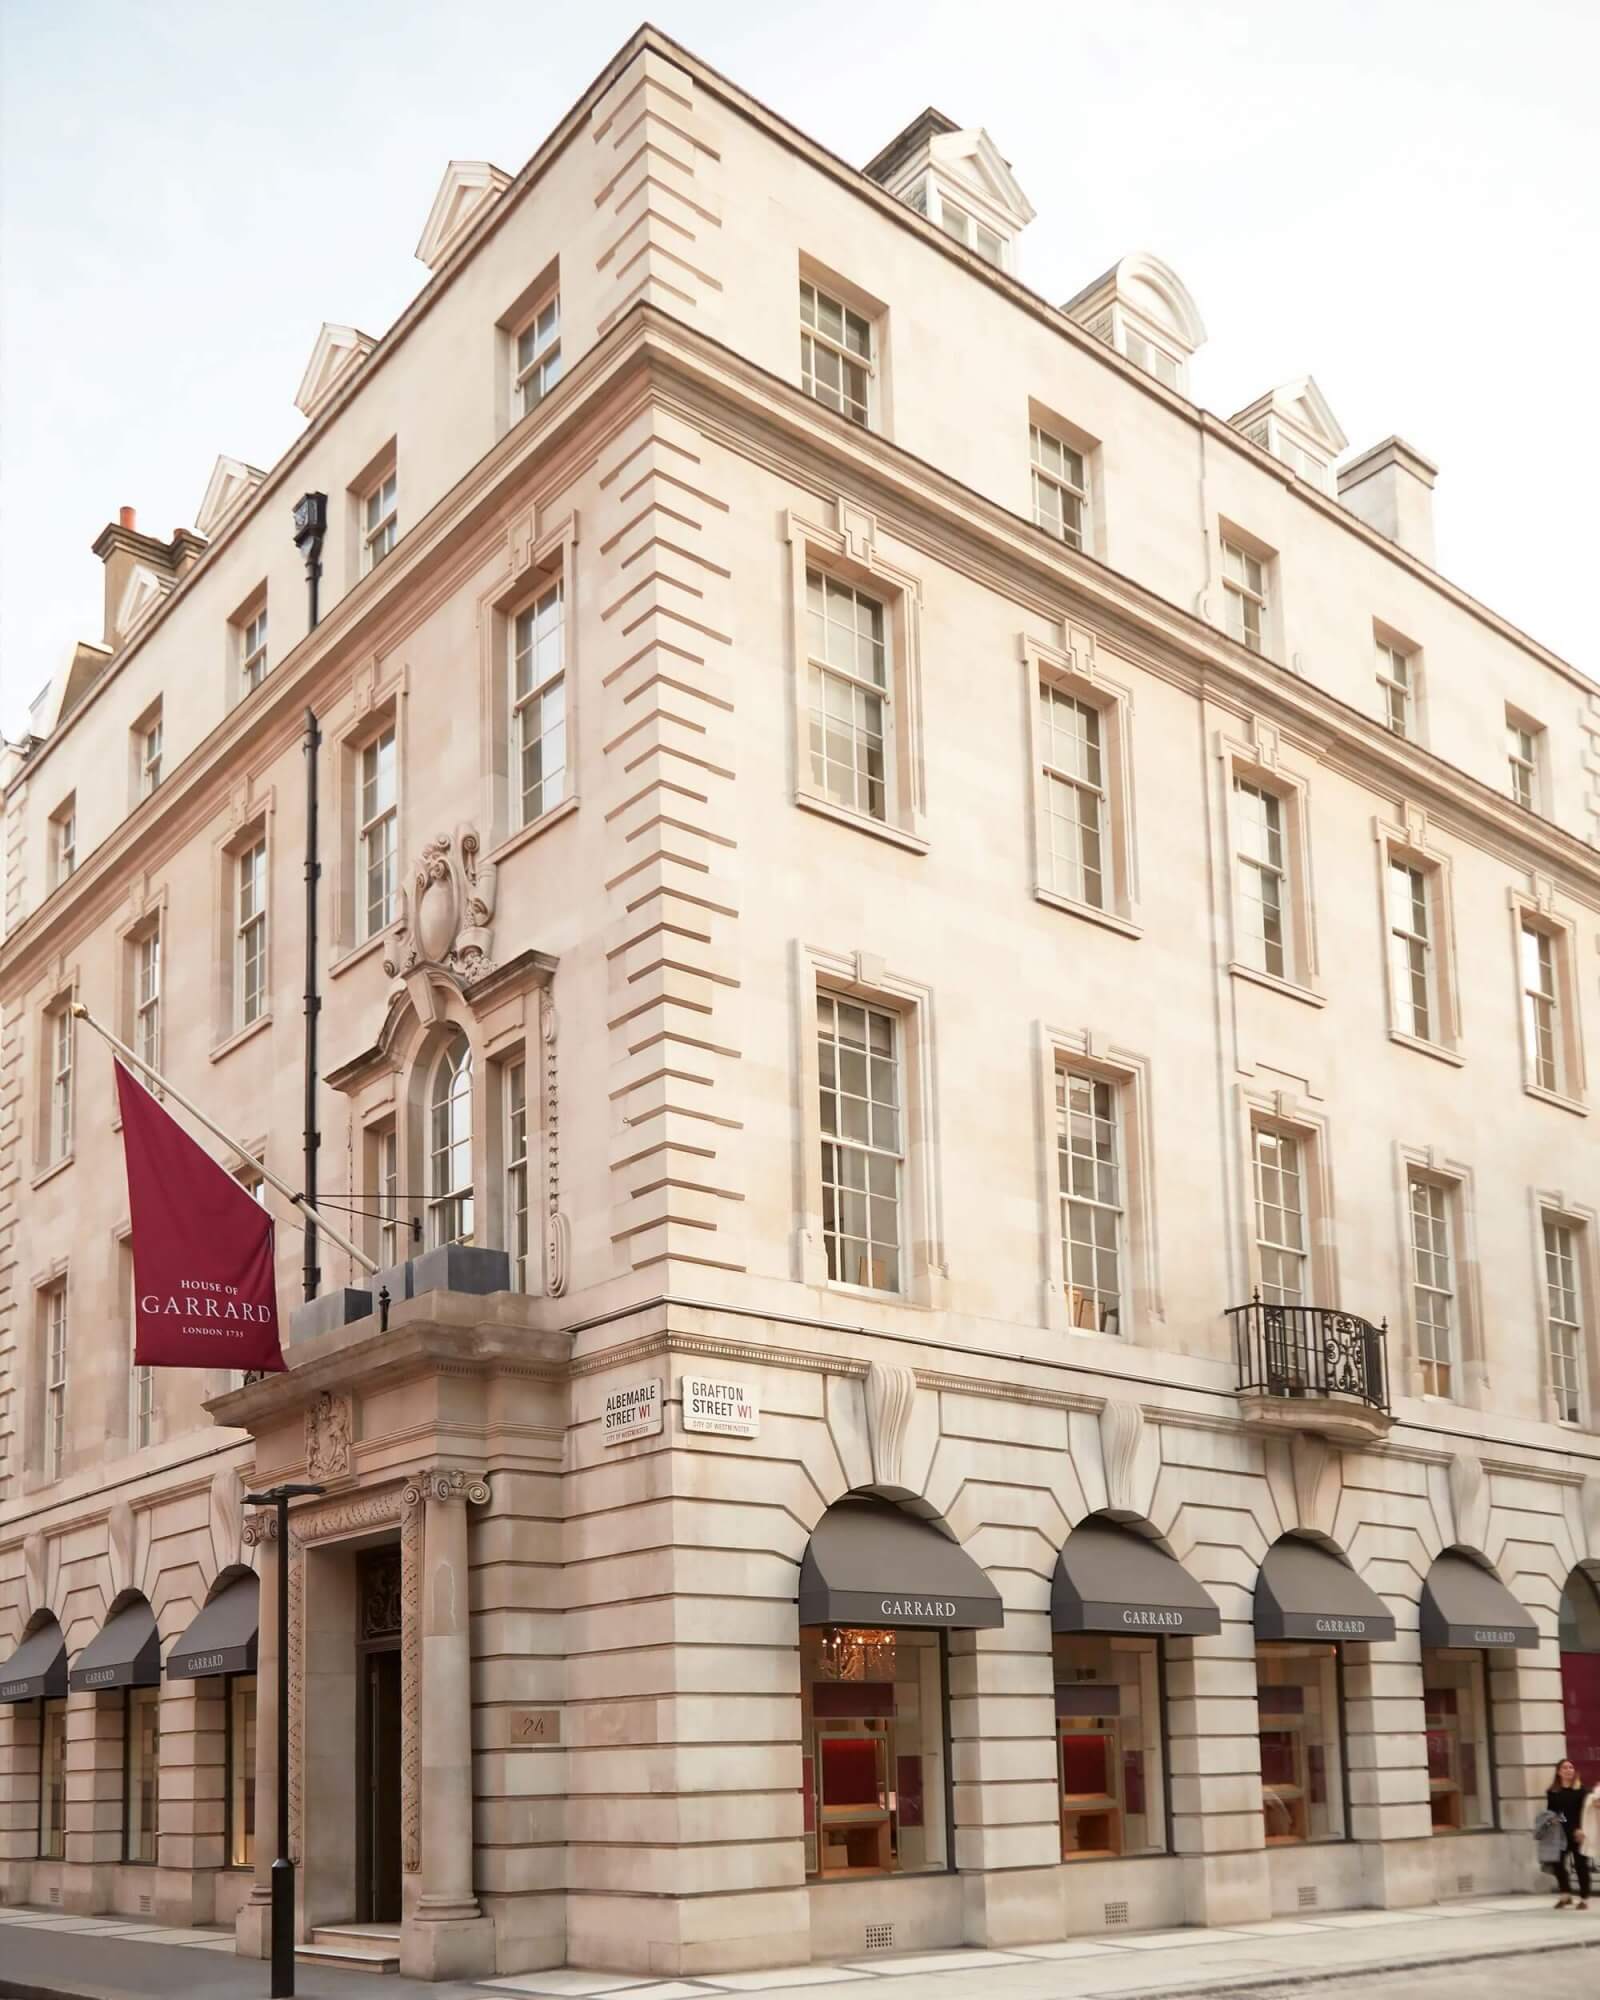 An exterior view of Garrard's flagship store on Albemarle Street in London's Mayfair